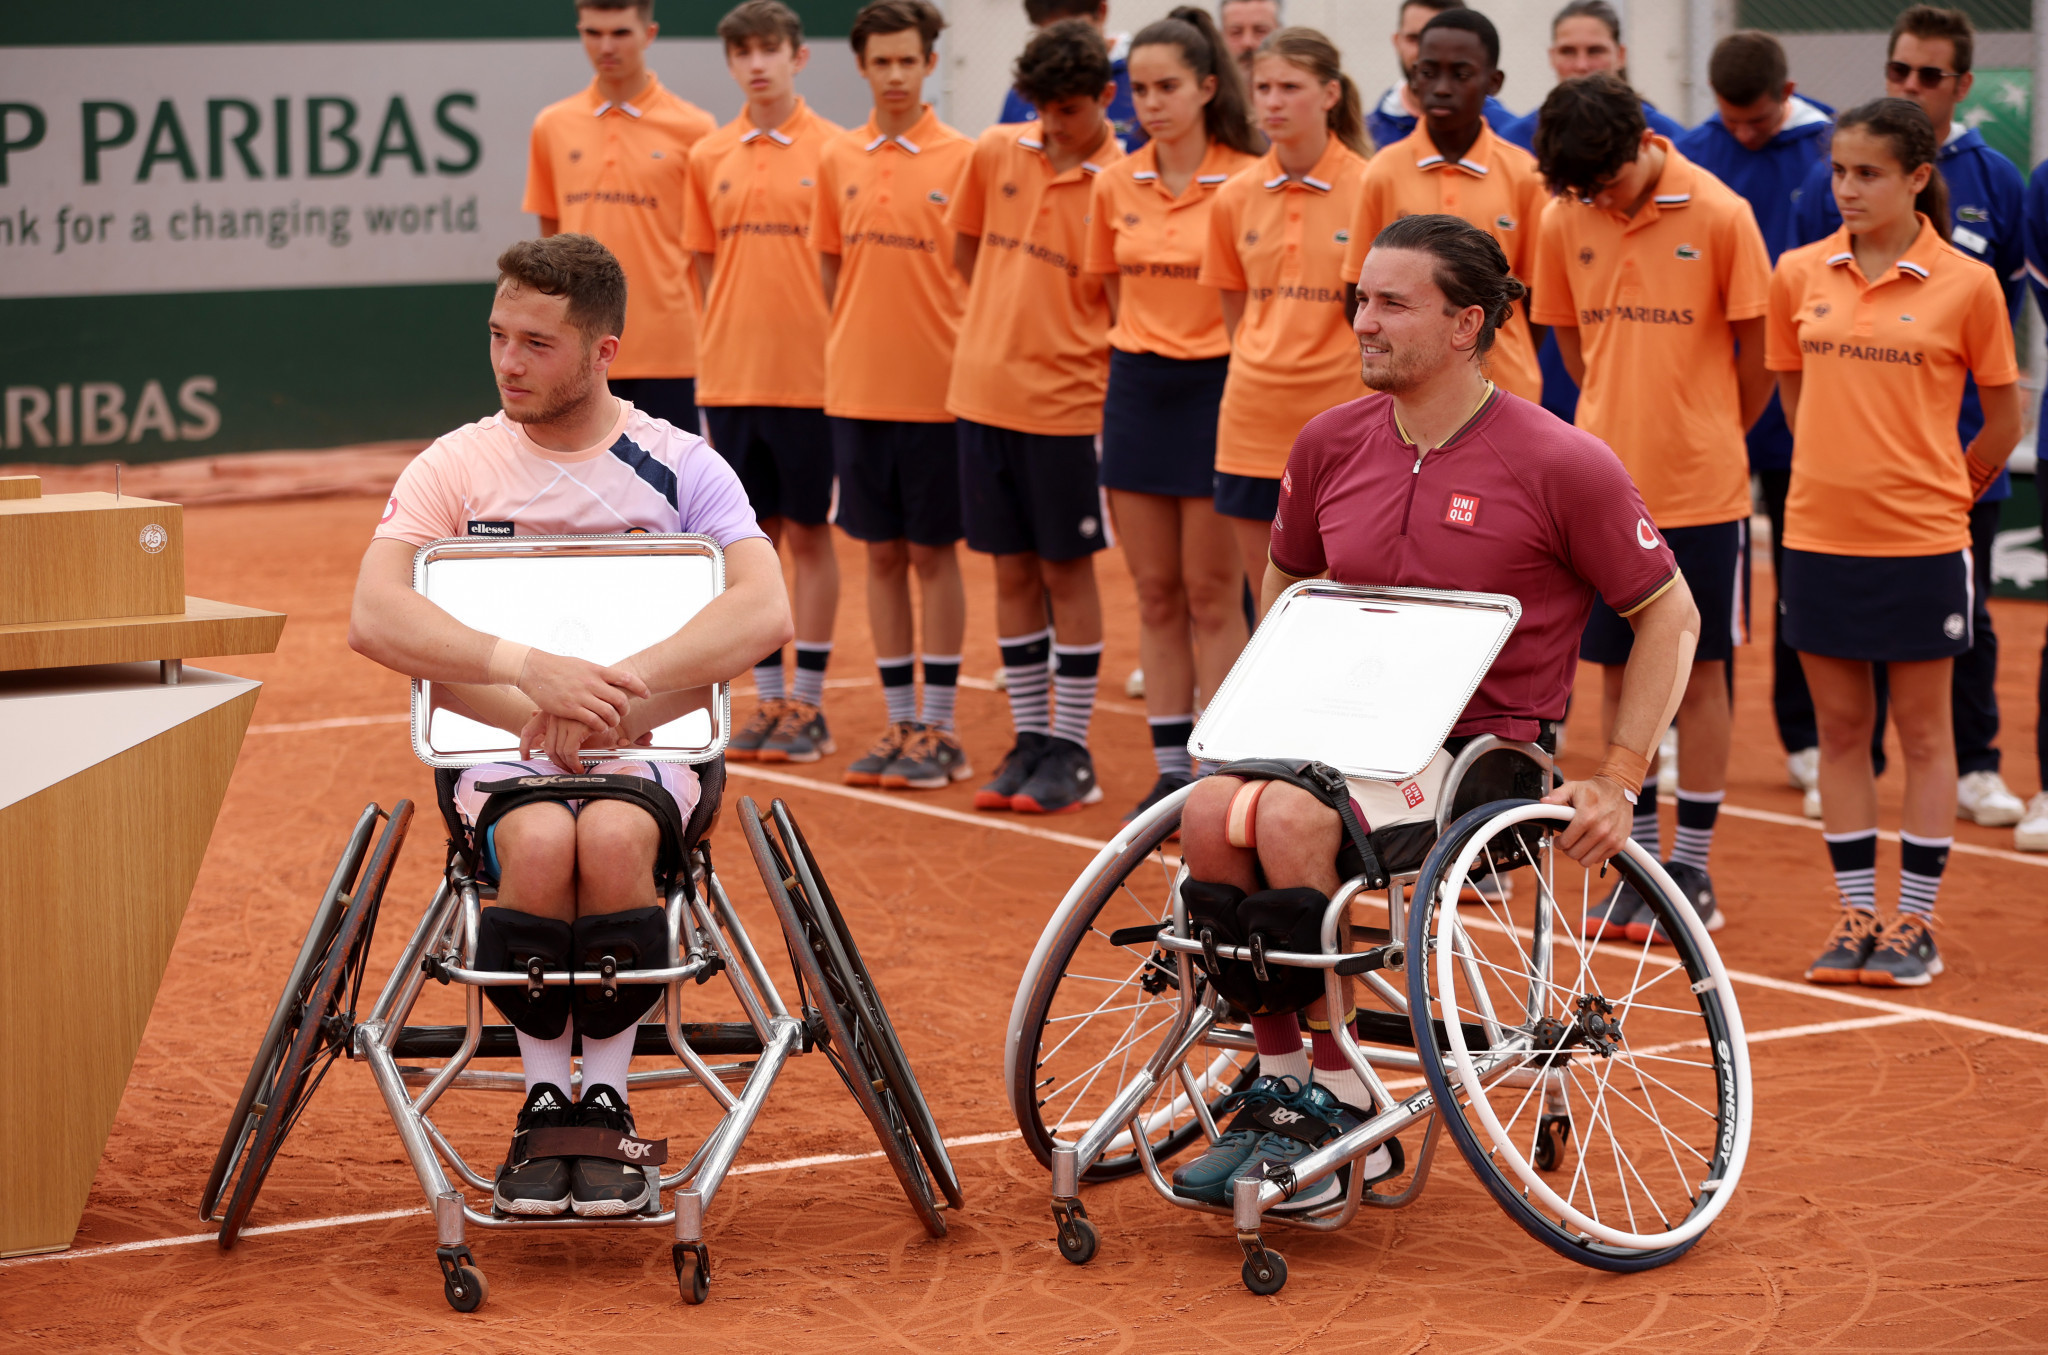 Alfie Hewett, left, and Gordon Reid of Britain clinched their third consecutive men's doubles crown at the French Open ©Getty Images